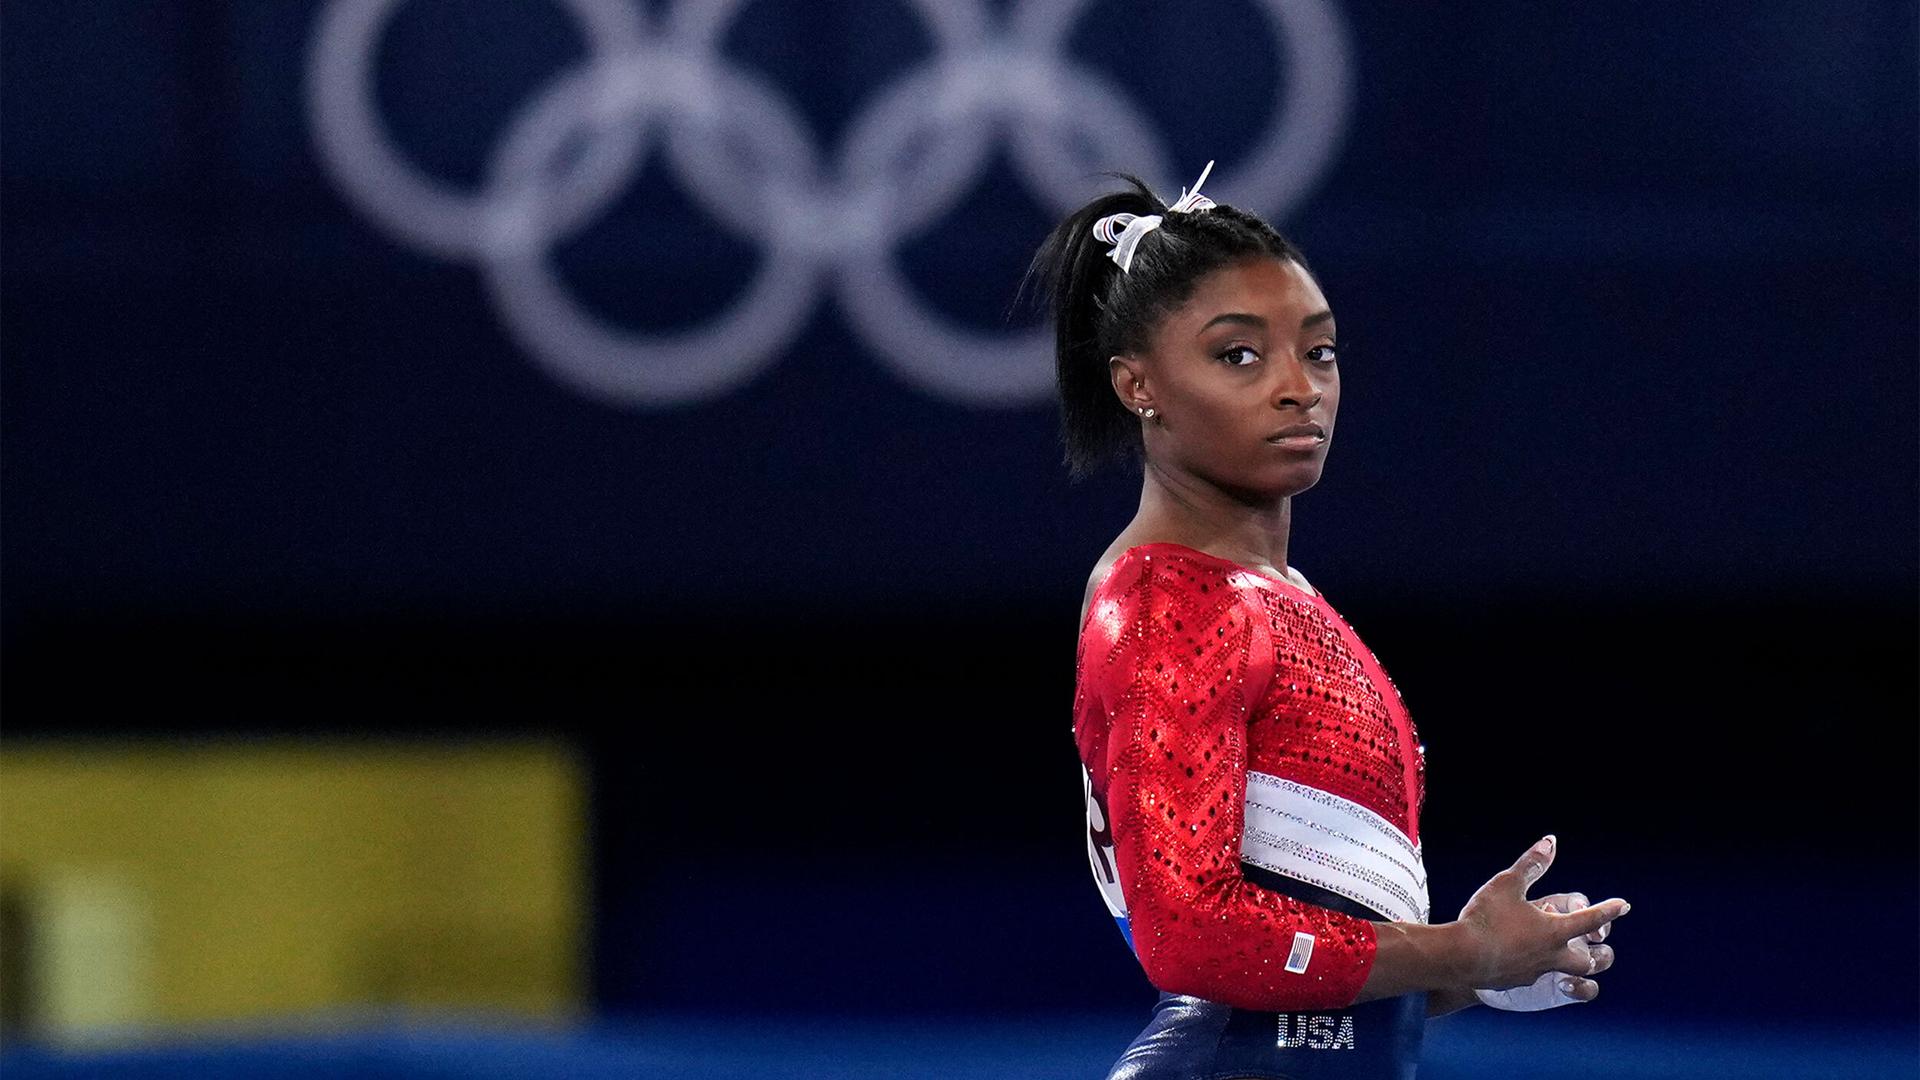 Simone Biles is shown in a profile photograph looking to her right, wearing a red, white and blue uniform with the Olympic rings in the distance.